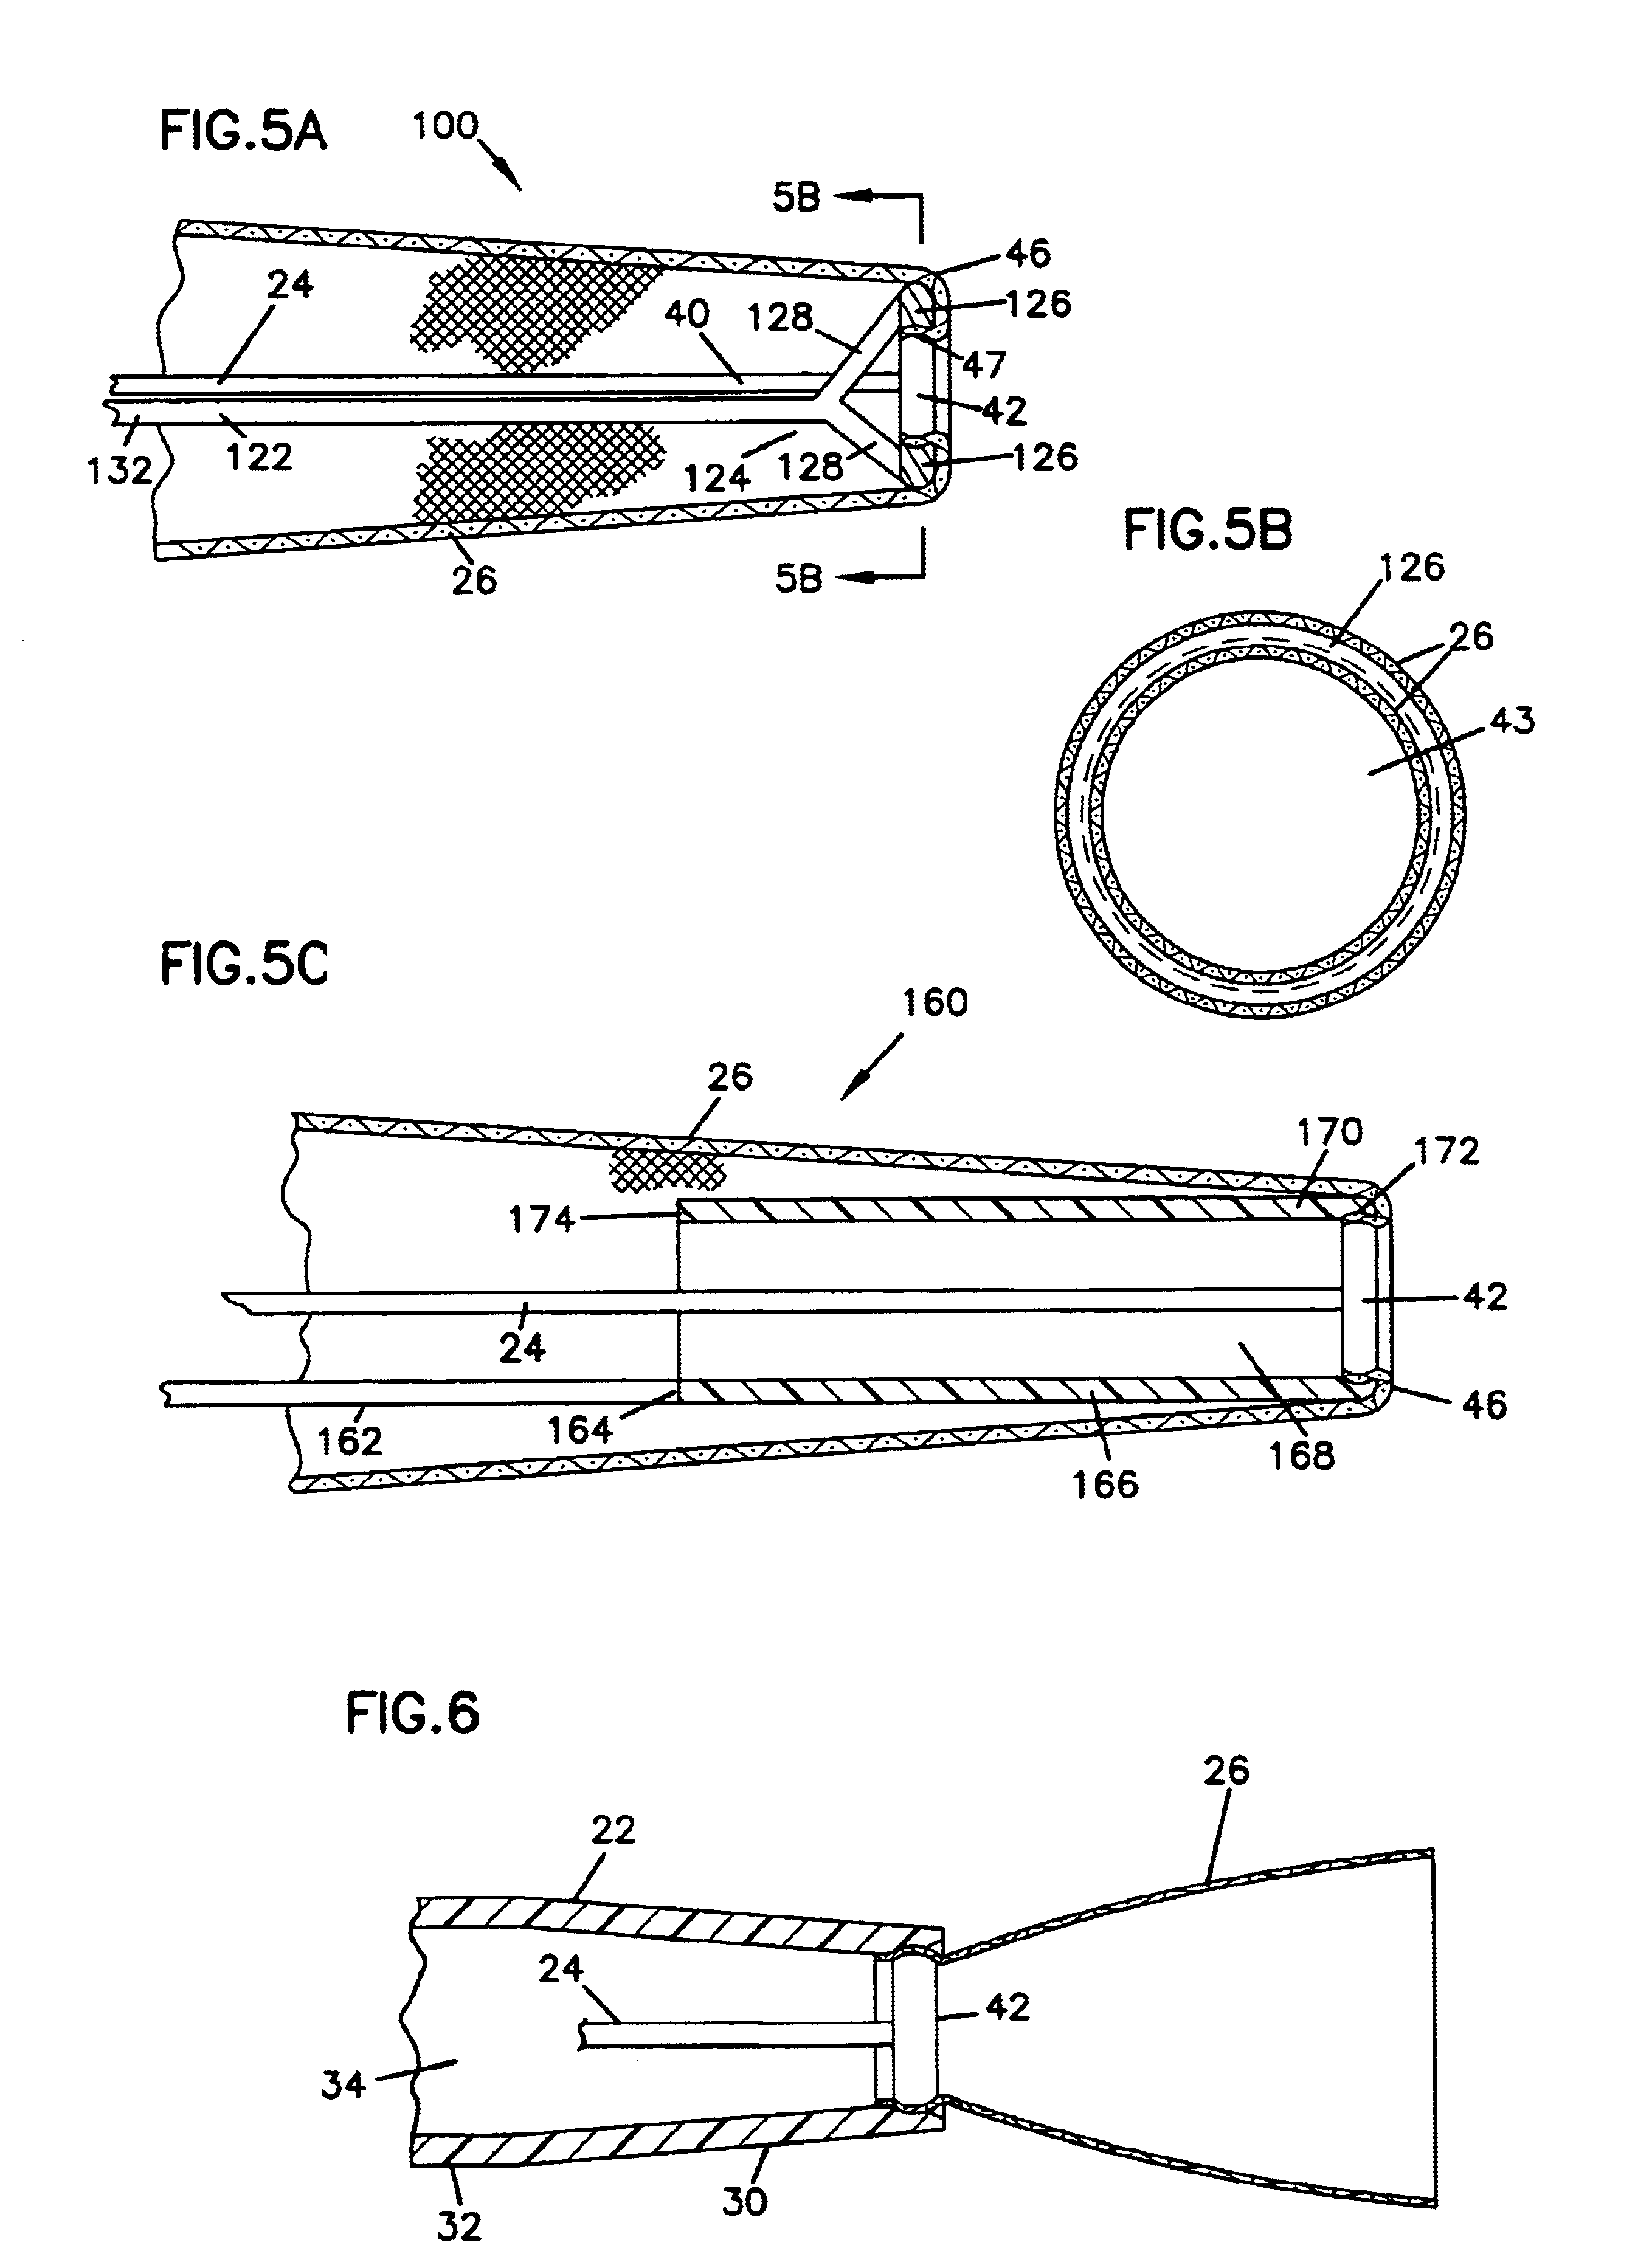 Everting stent and stent delivery system